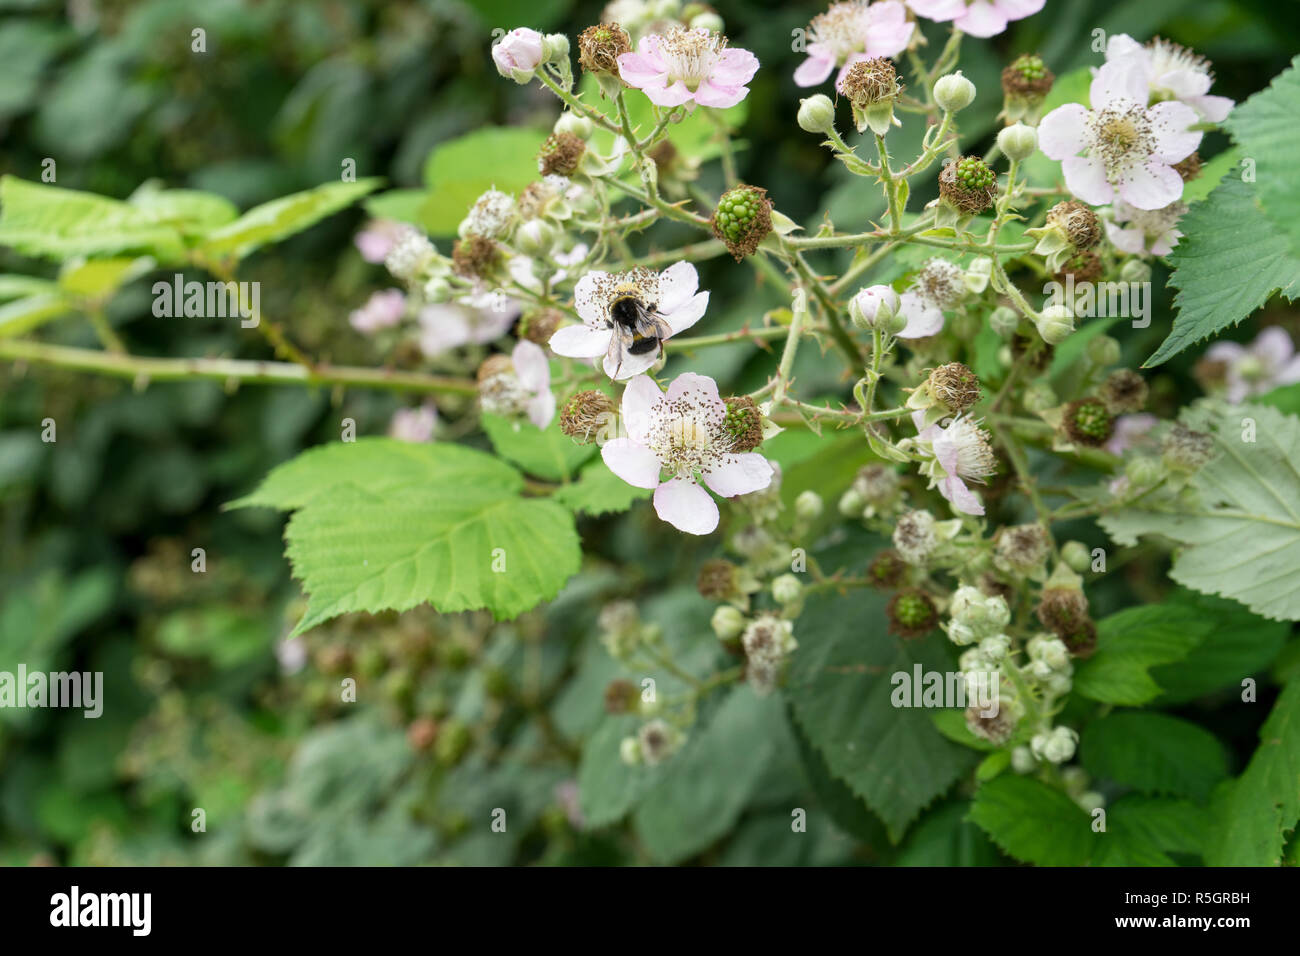 Bush with blackberry blossoms, fruits and a bumblebee Stock Photo